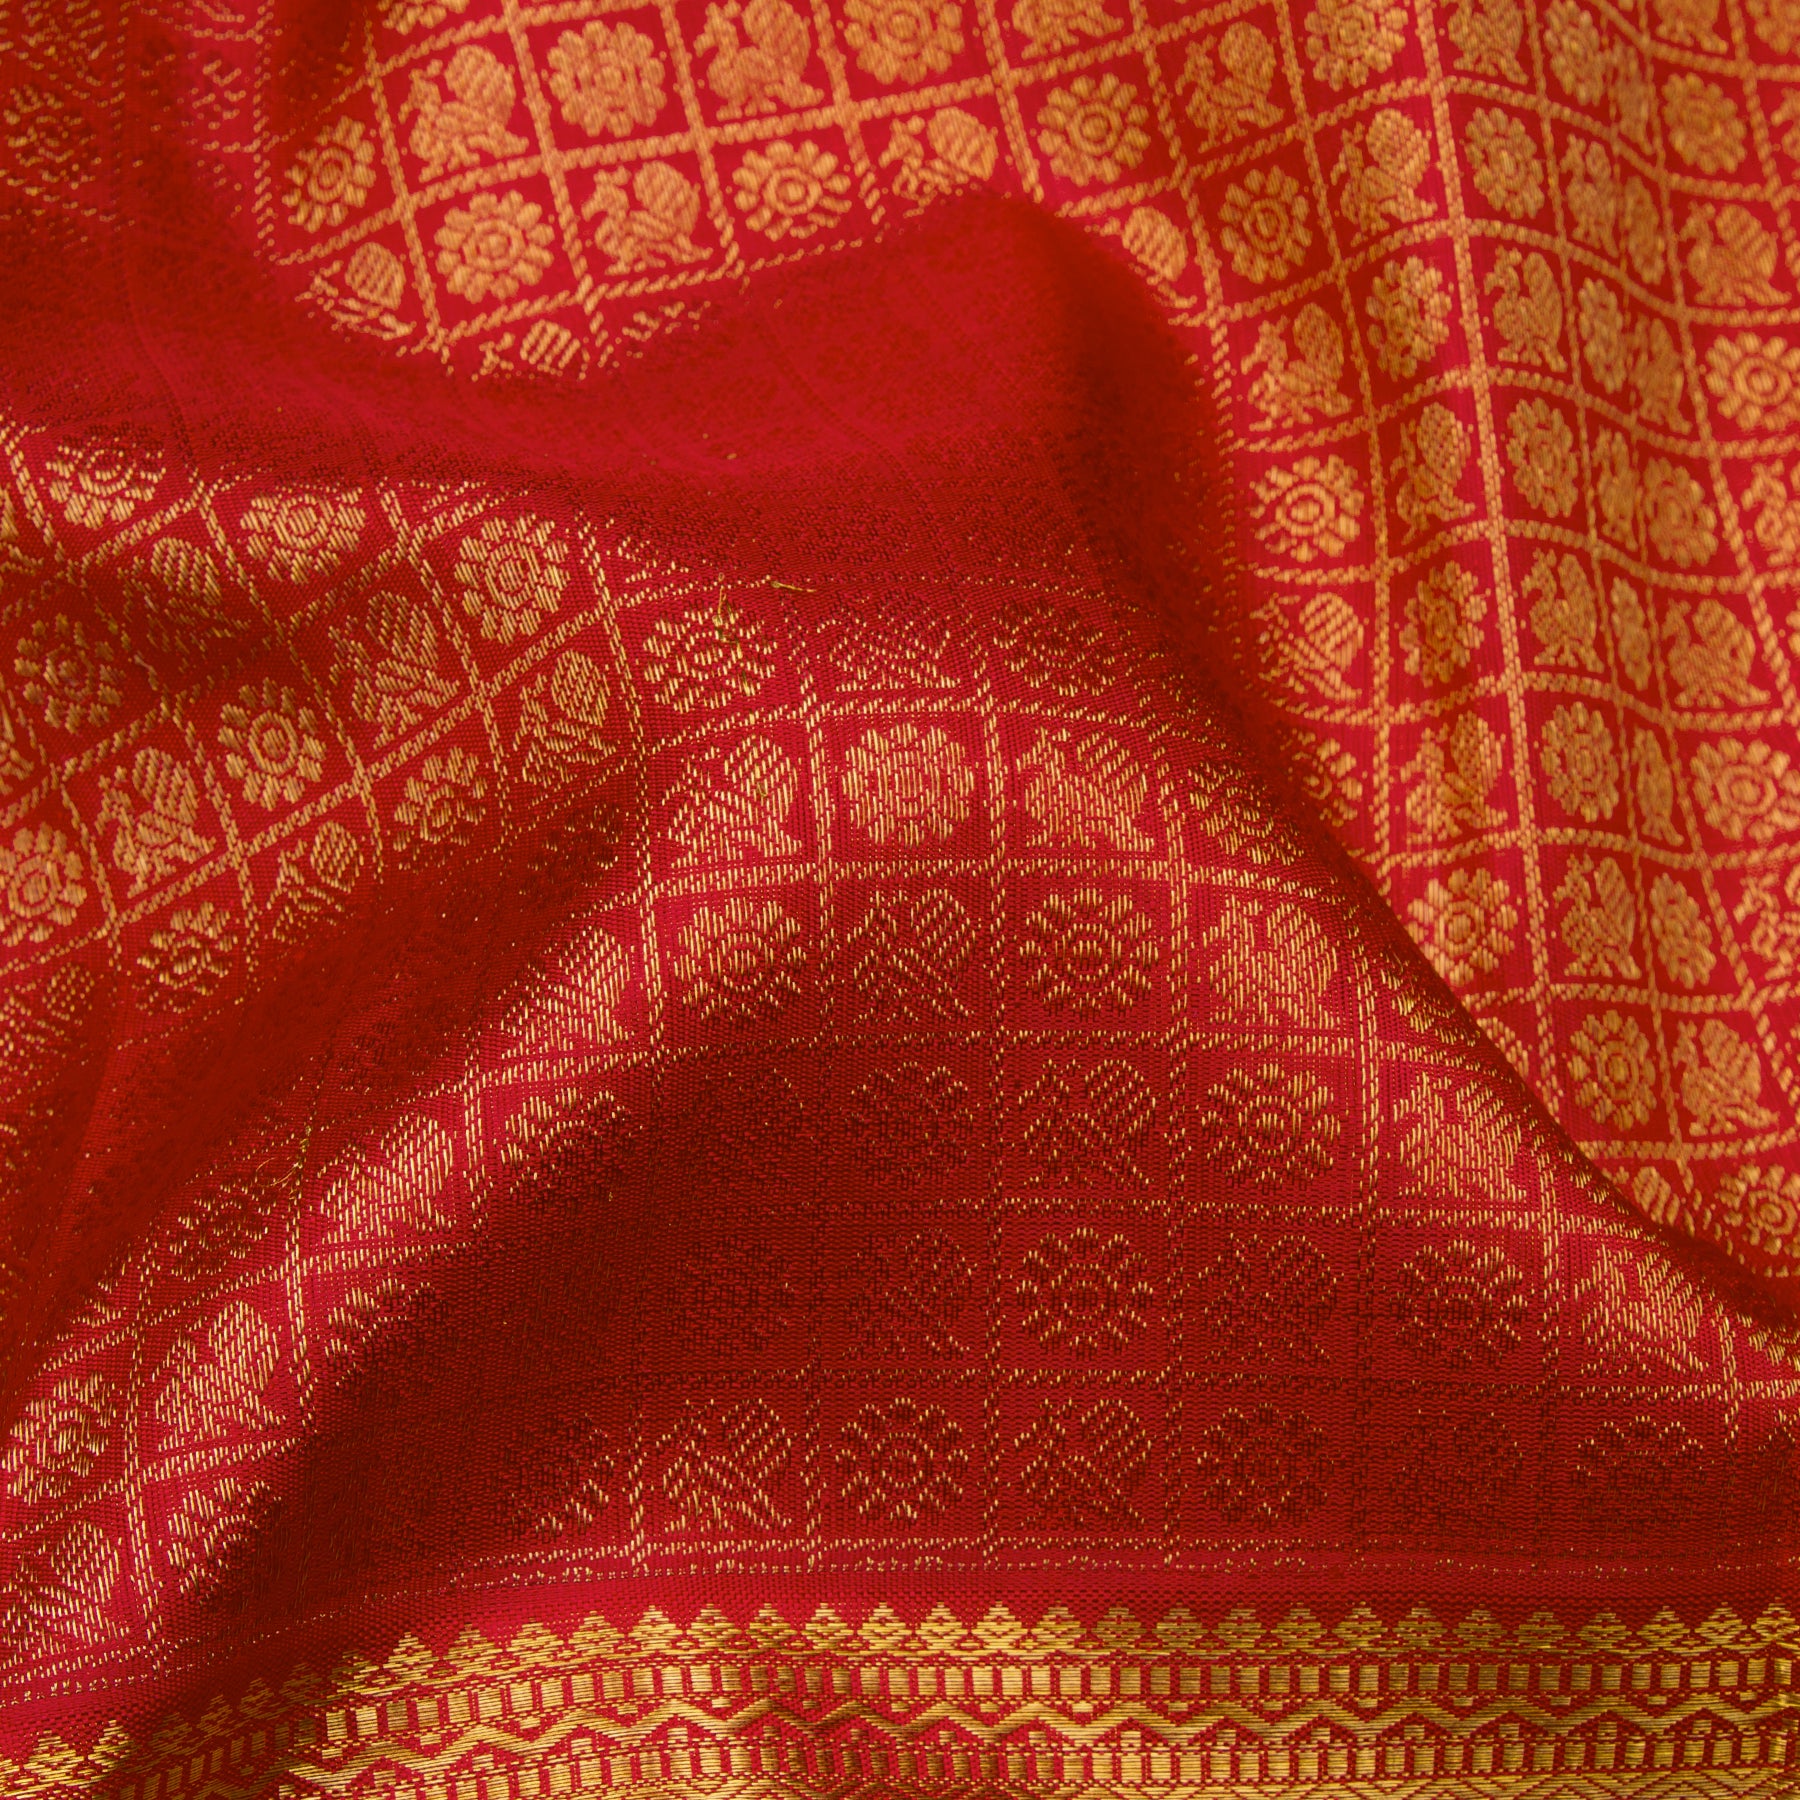 Kulanthi Silva on X: The colour, shape and the silk material with